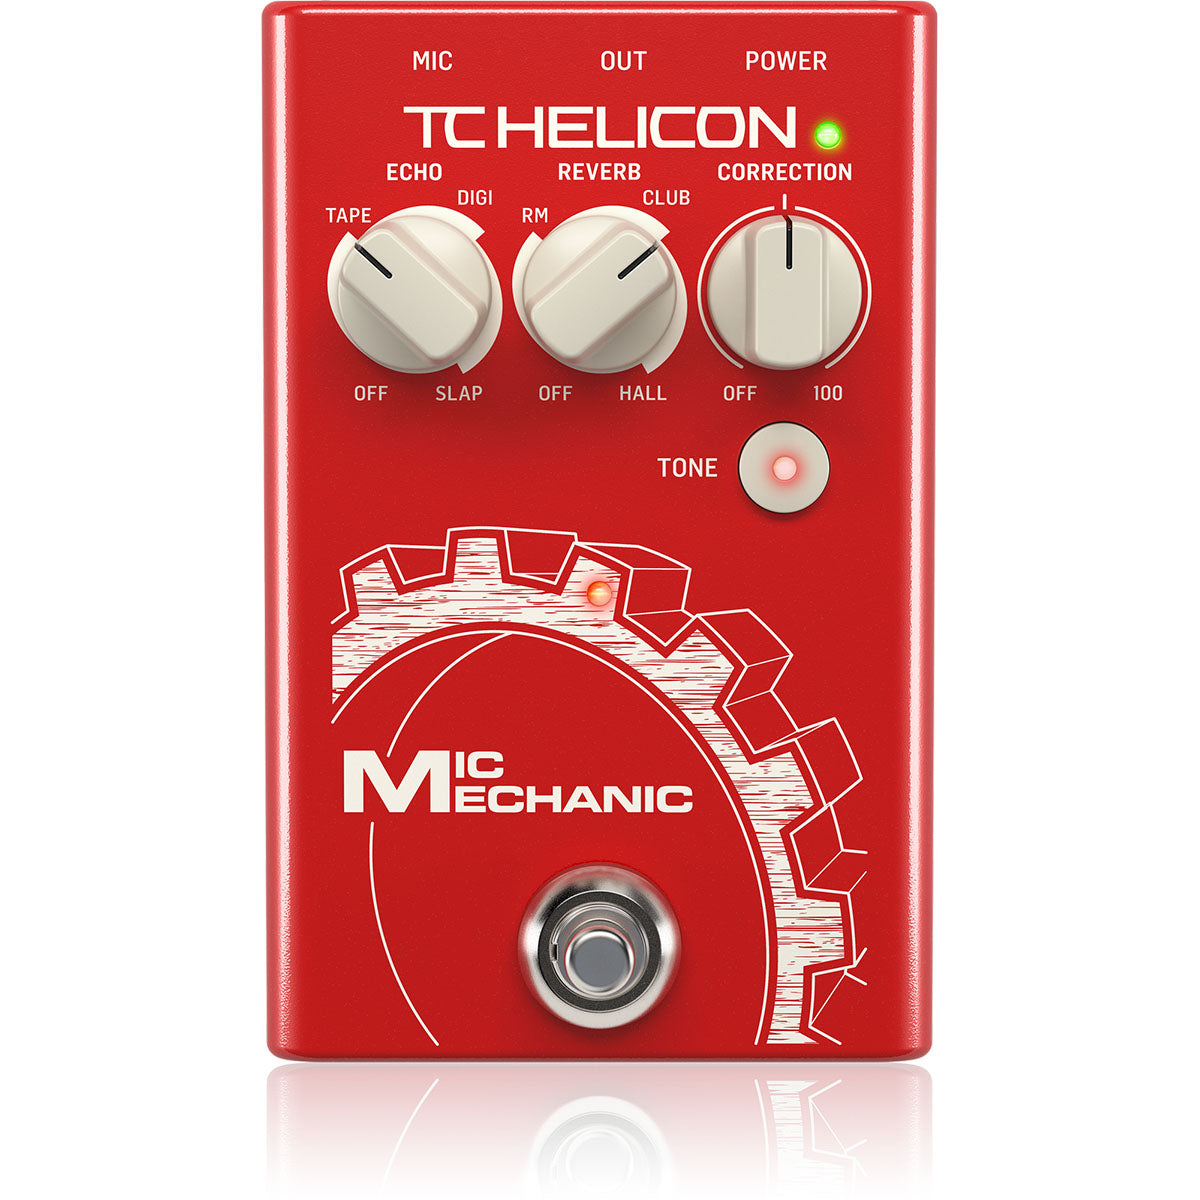 TC Helicon Mic Mechanic 2 Vocal Effects Pedal w/ Pitch Correction